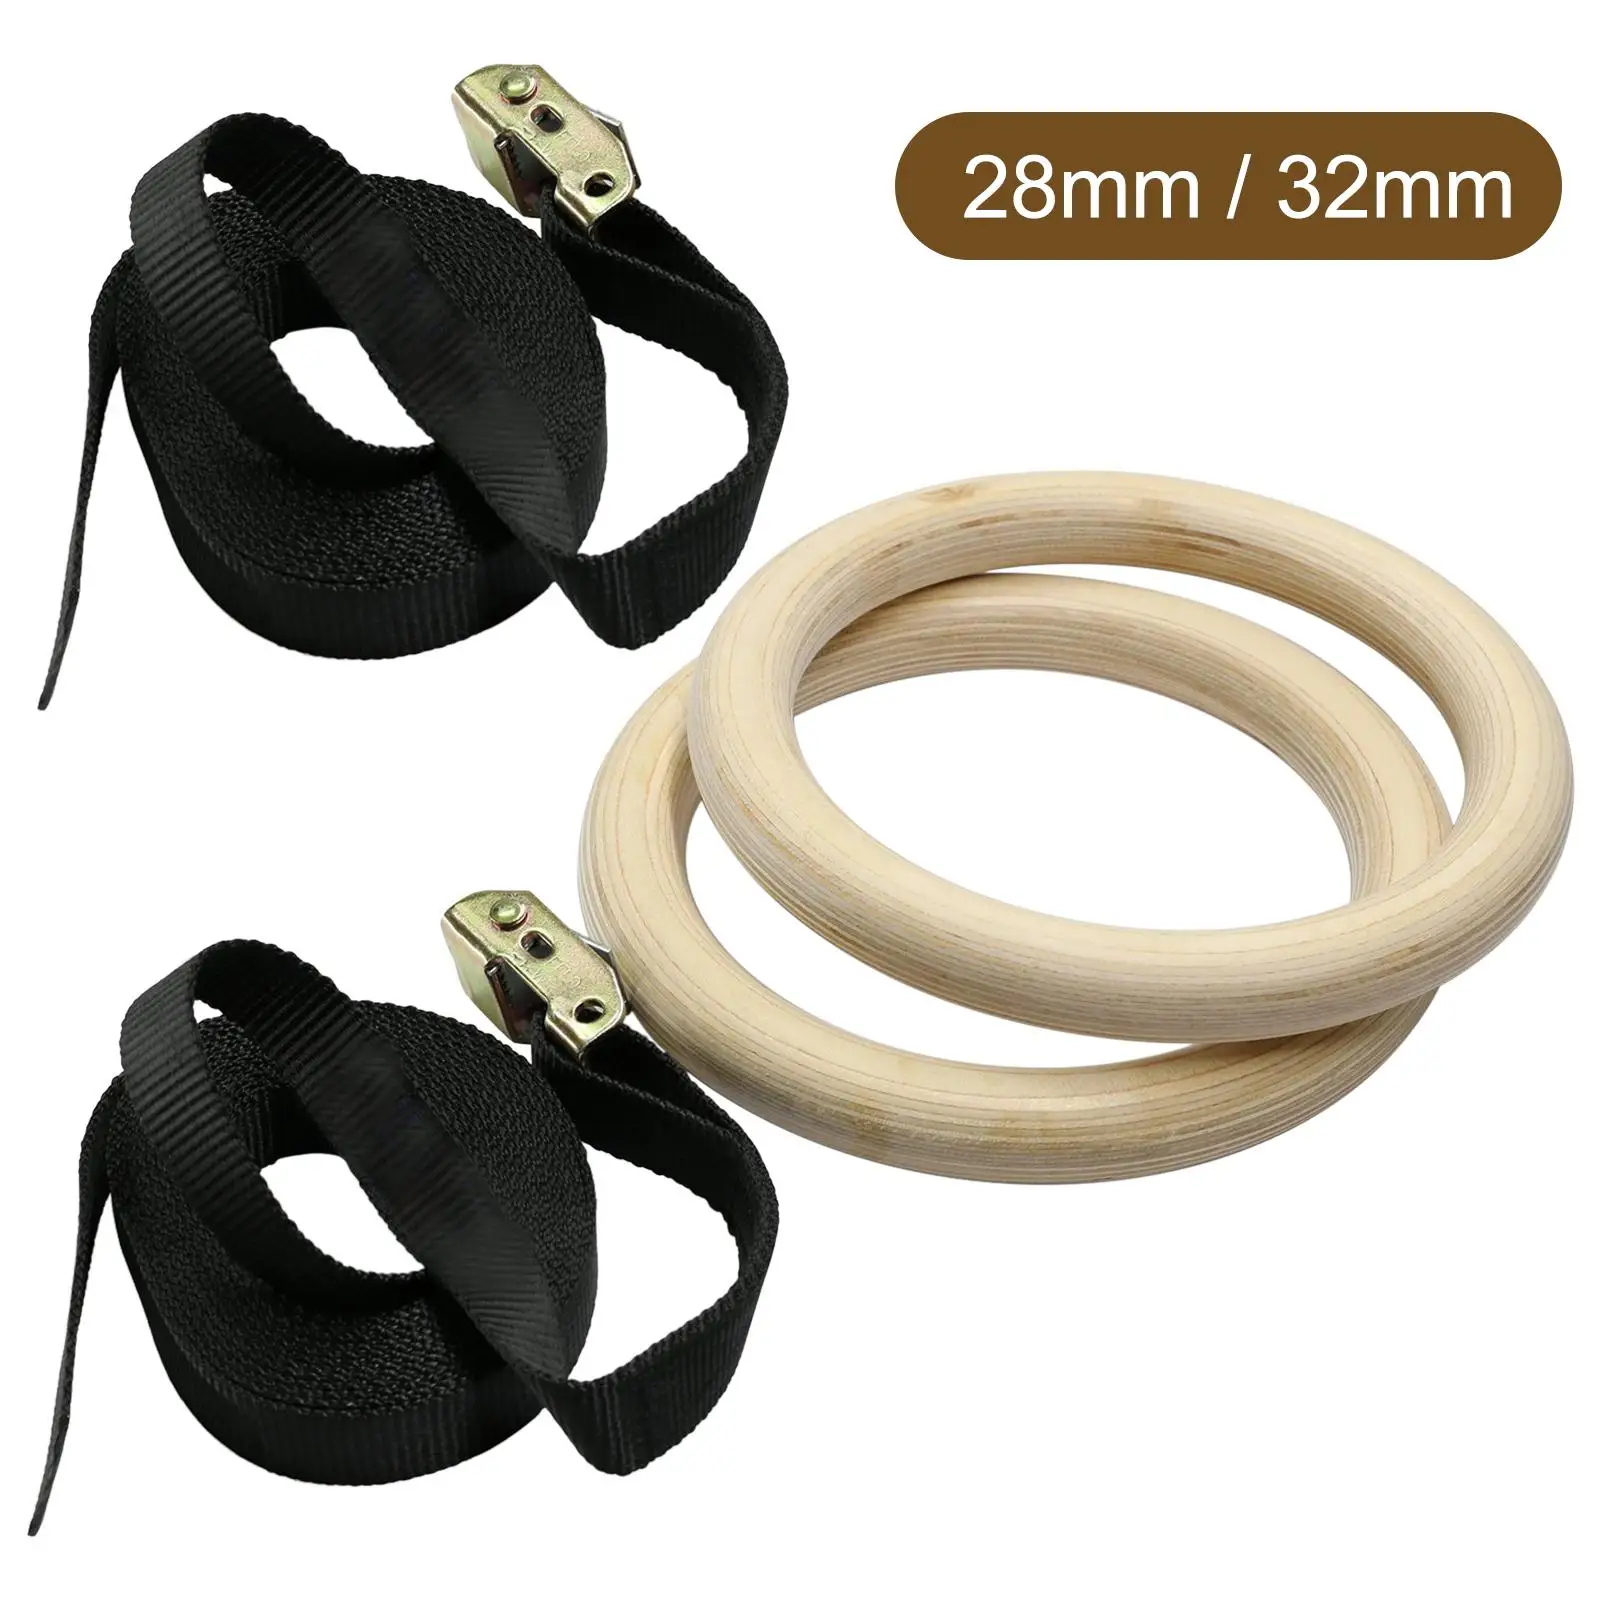 Indoor Gymnastics Rings Sports Rings Adjustable 14.76ft Long Straps Wooden Rings Training Equipment for Workout Fitness Home Gym